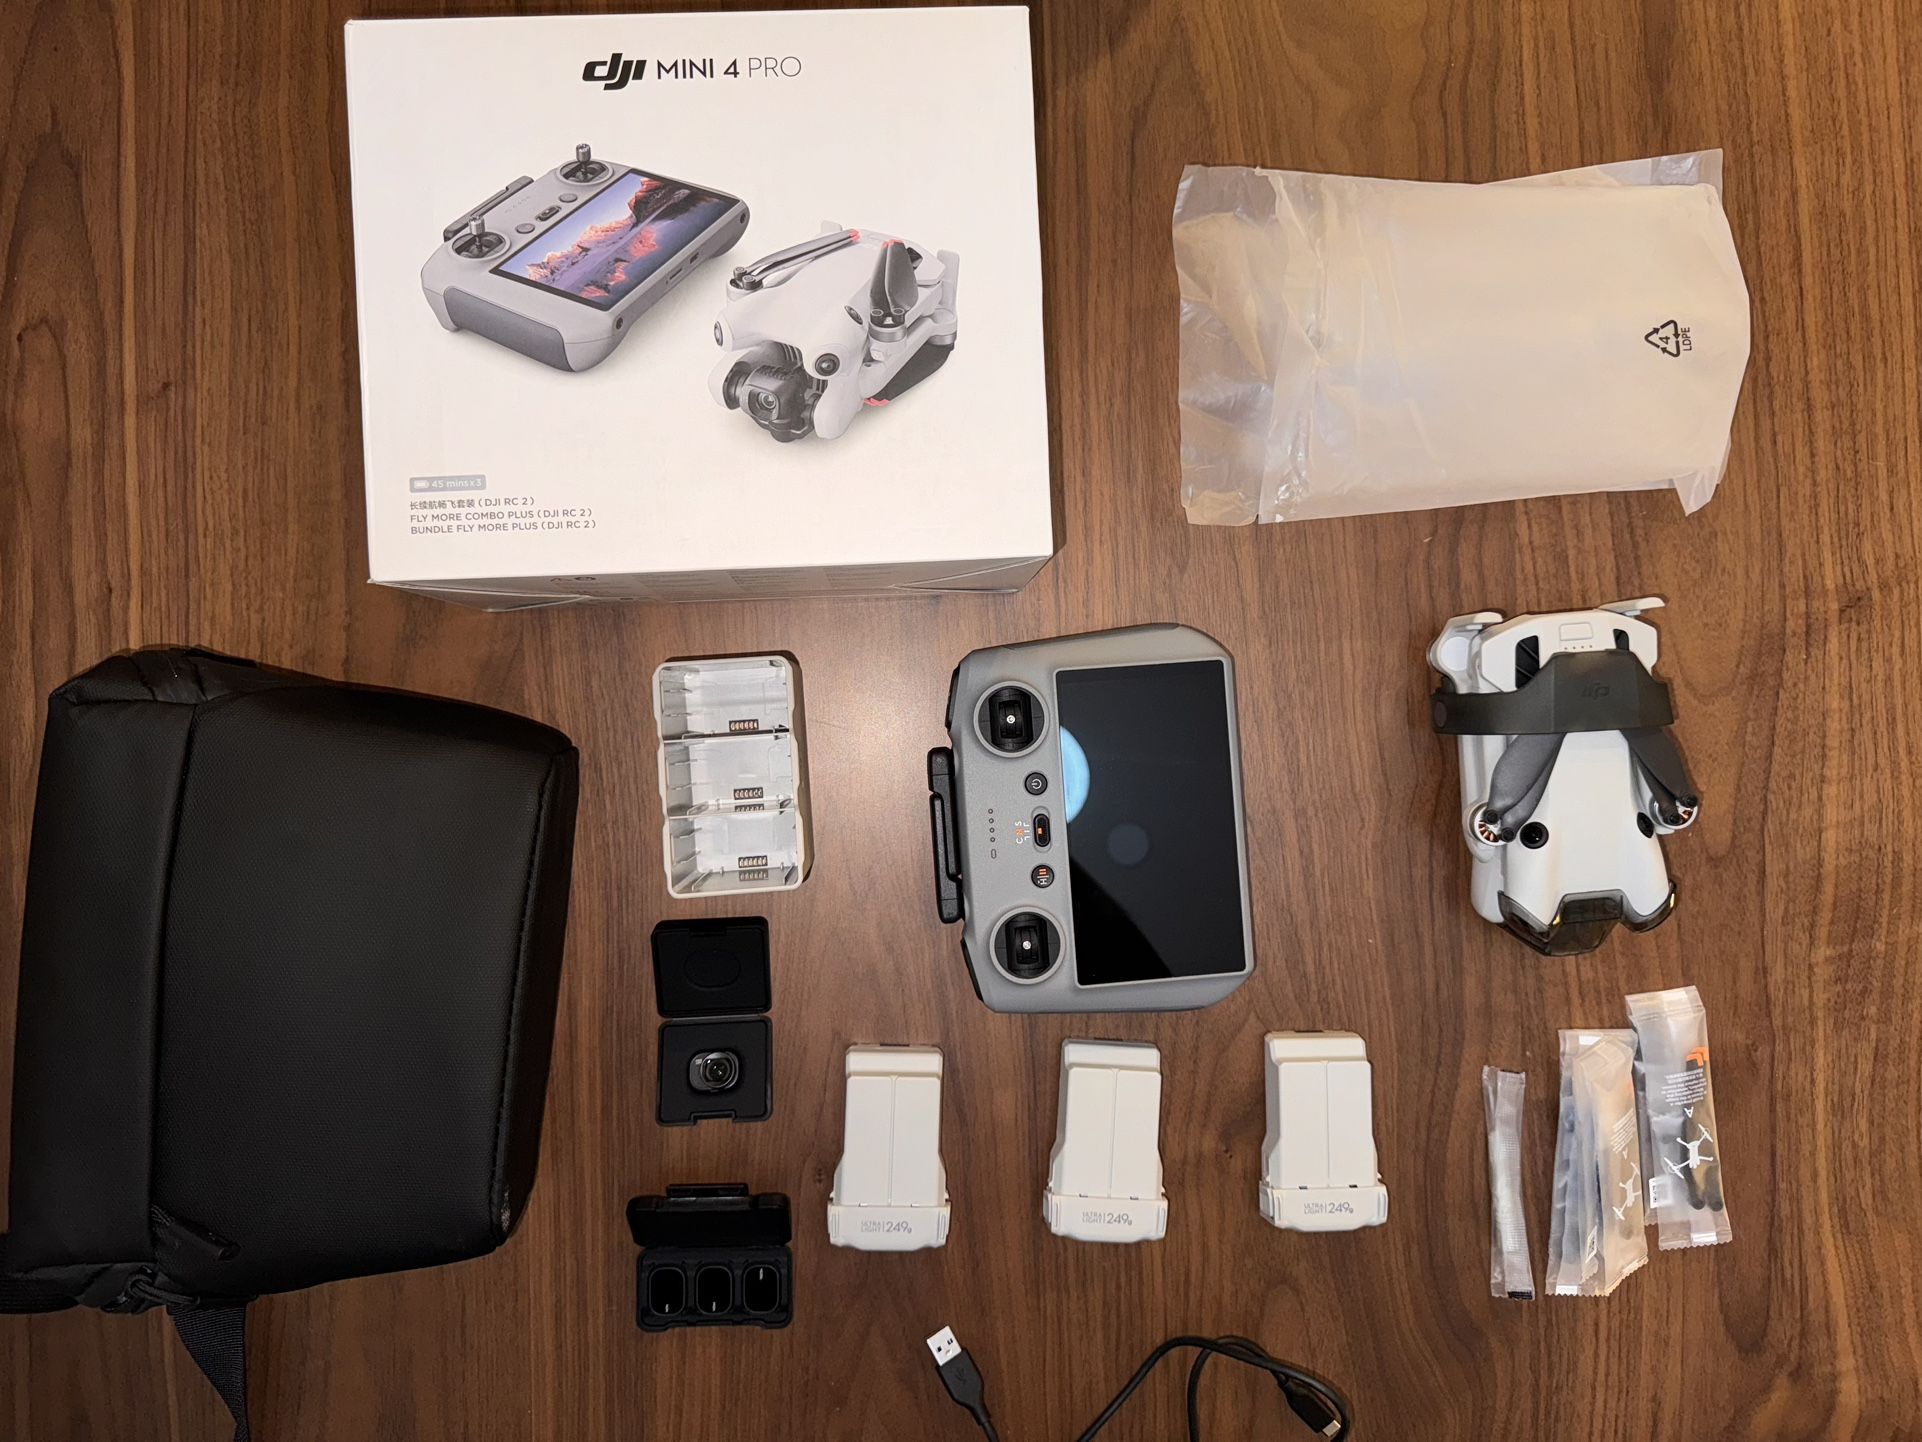 DJI - Mini 4 Pro Fly More Combo Drone and RC 2 Remote Control with Built-in Screen